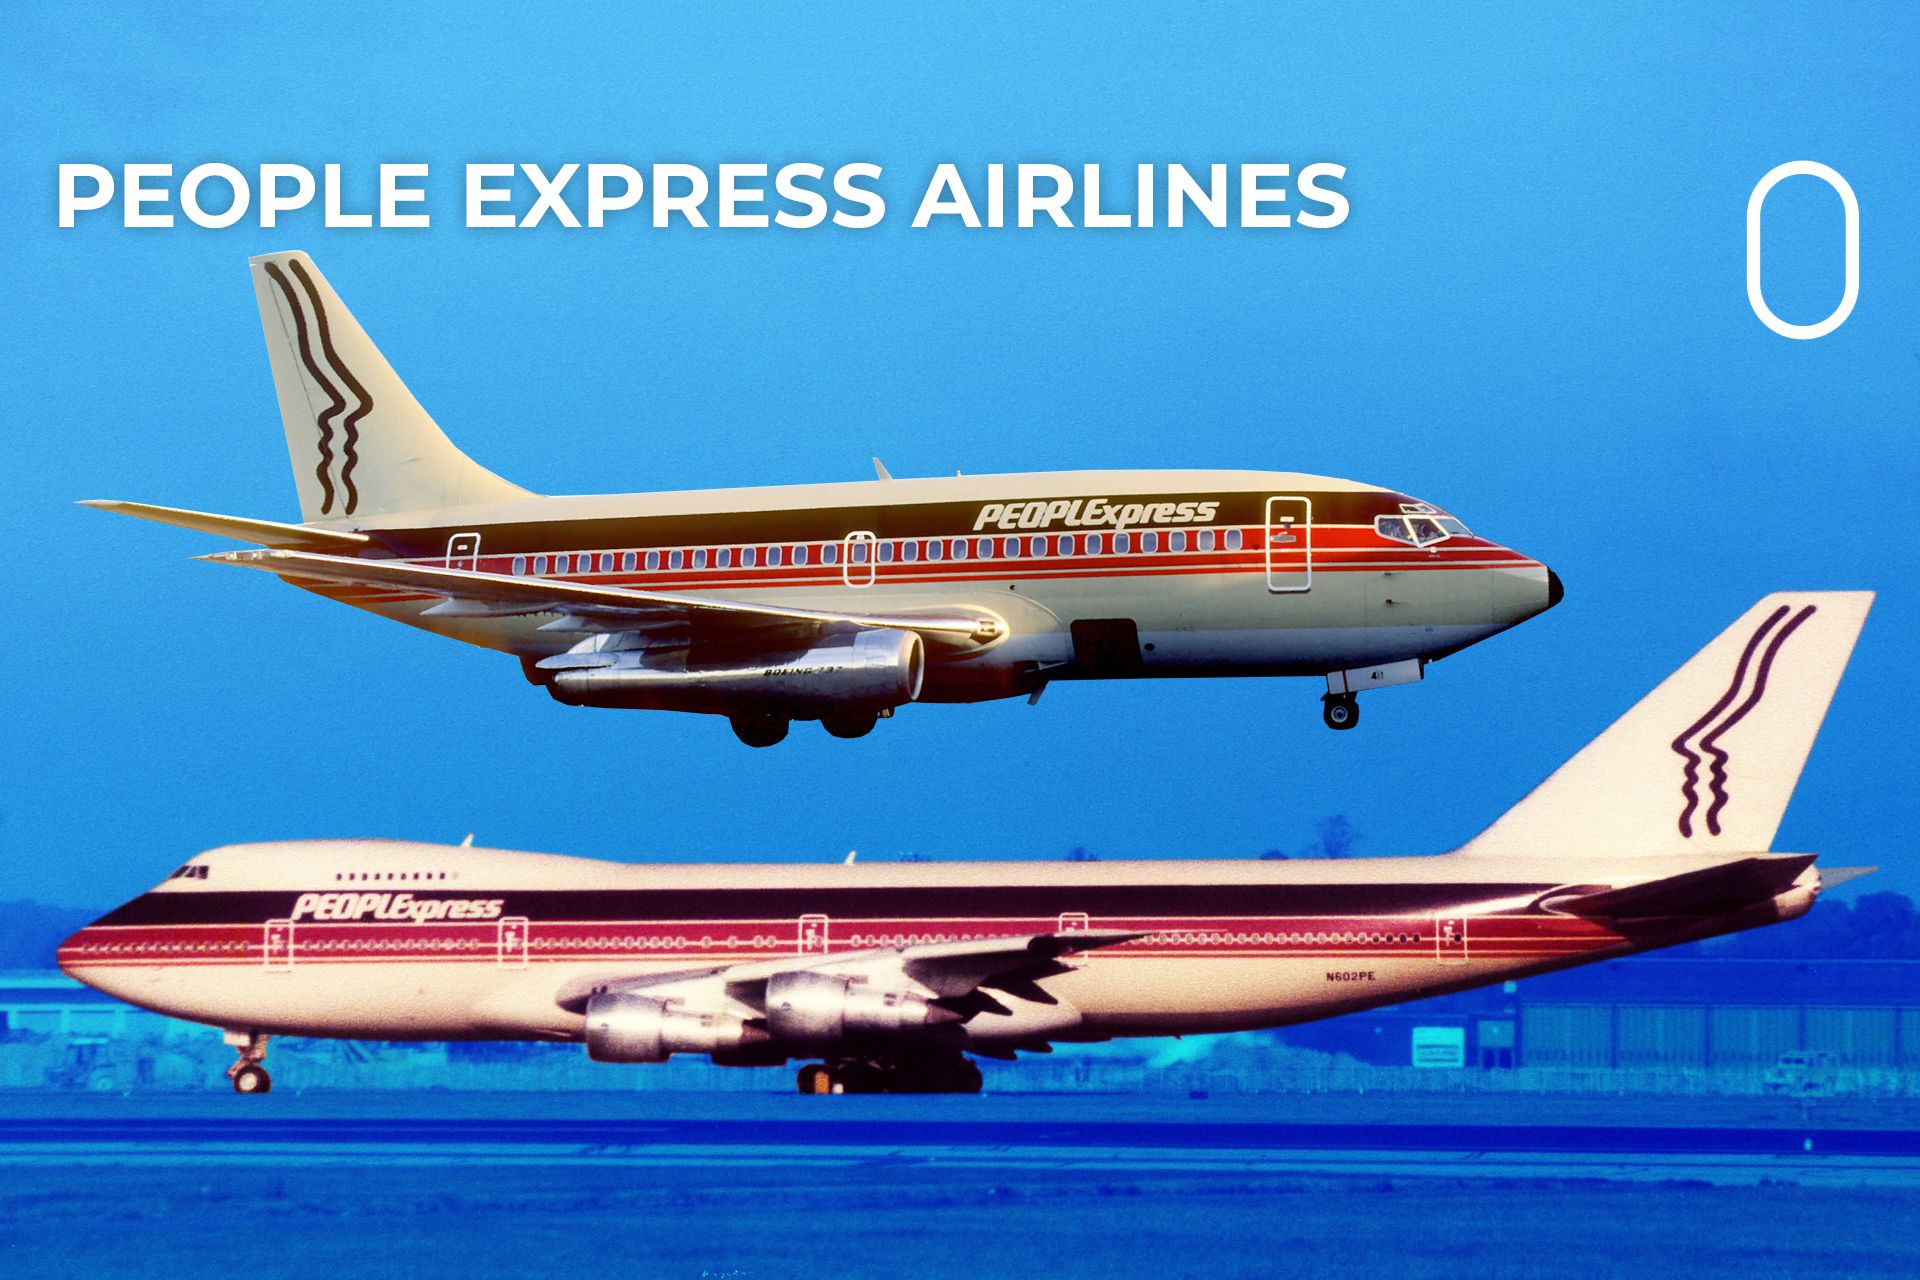 Which Aircraft Types Did People Express Airlines Fly?